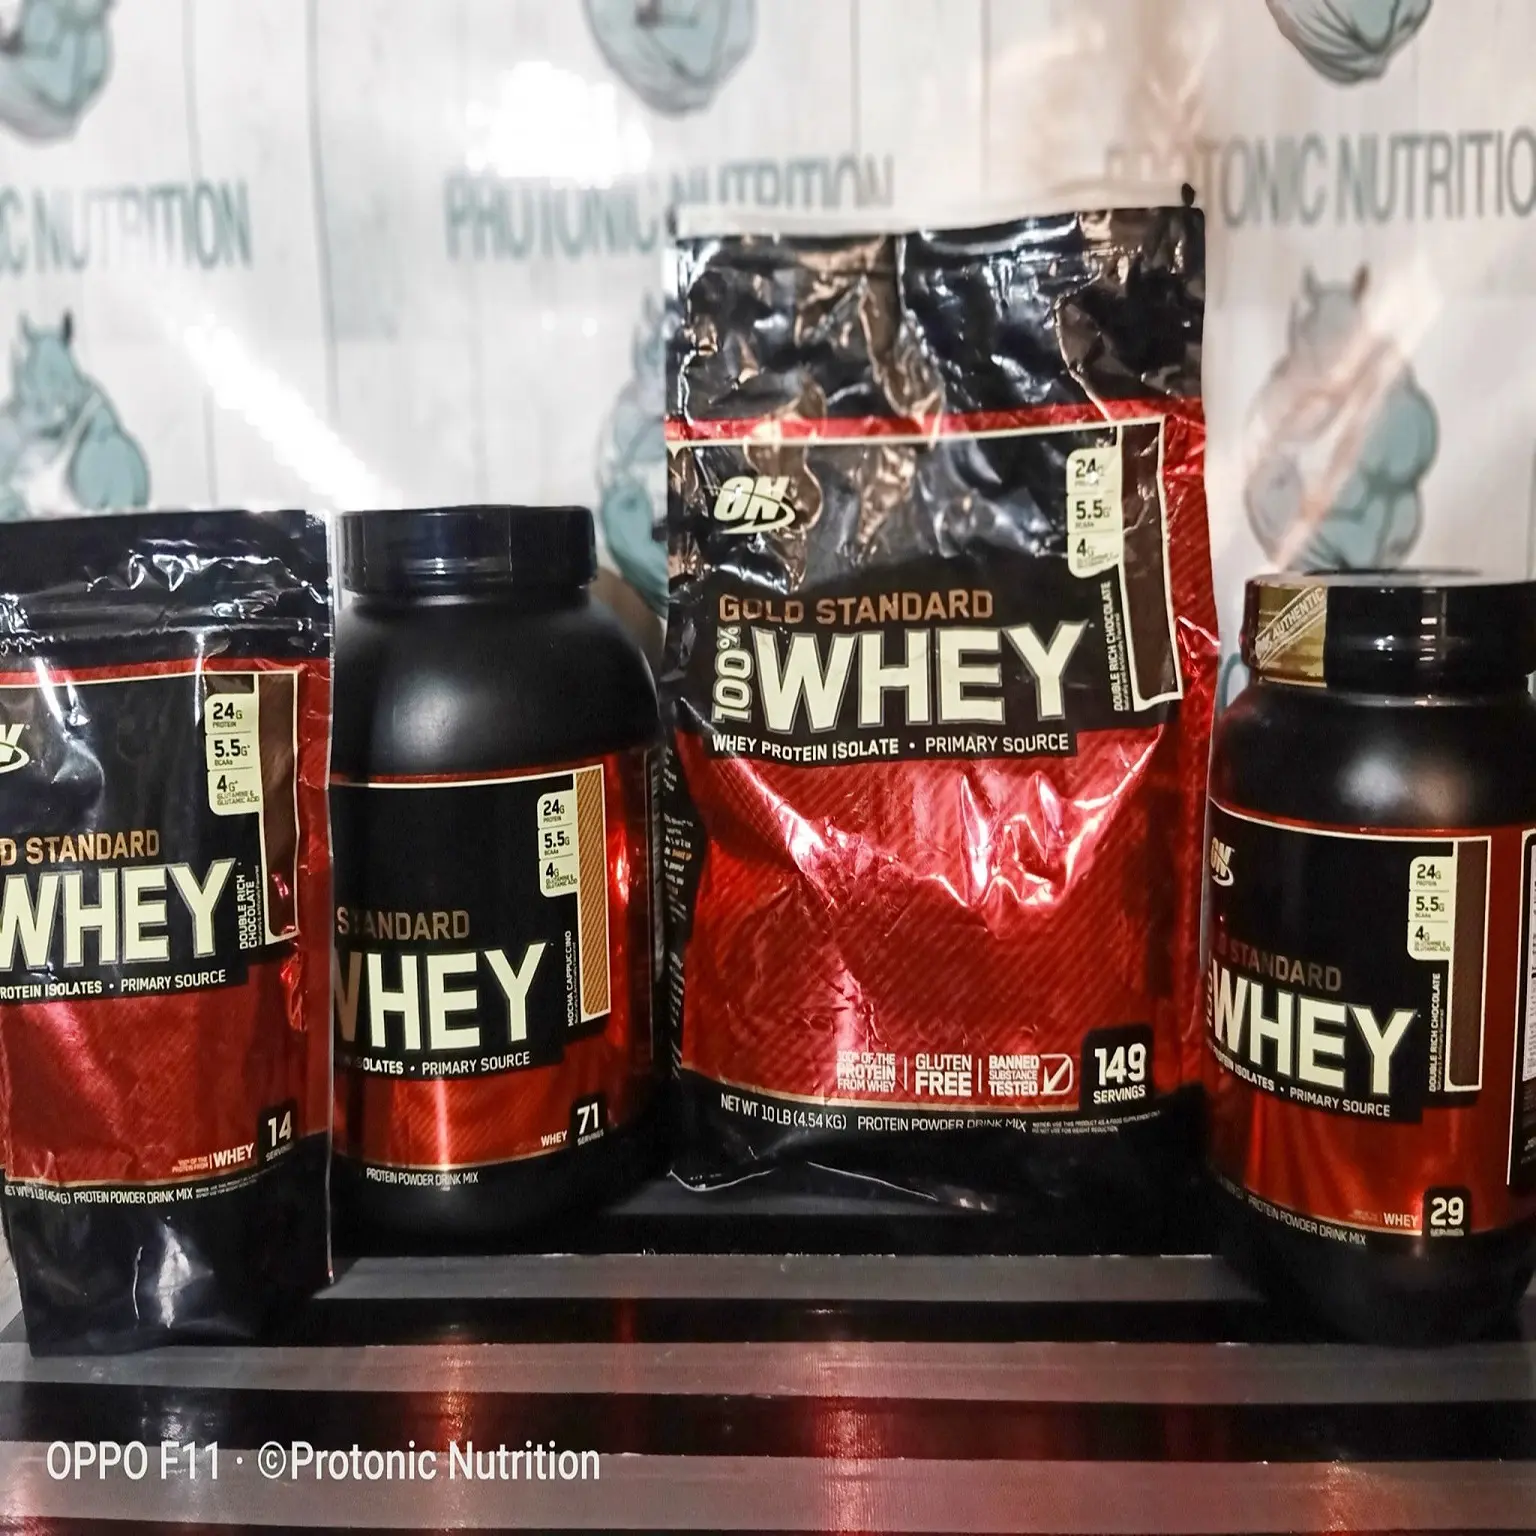 Premium Whey Protein Isolate 175kg and 400kg - Optimum Nutrition 100% High Quality Whey Protein Powder